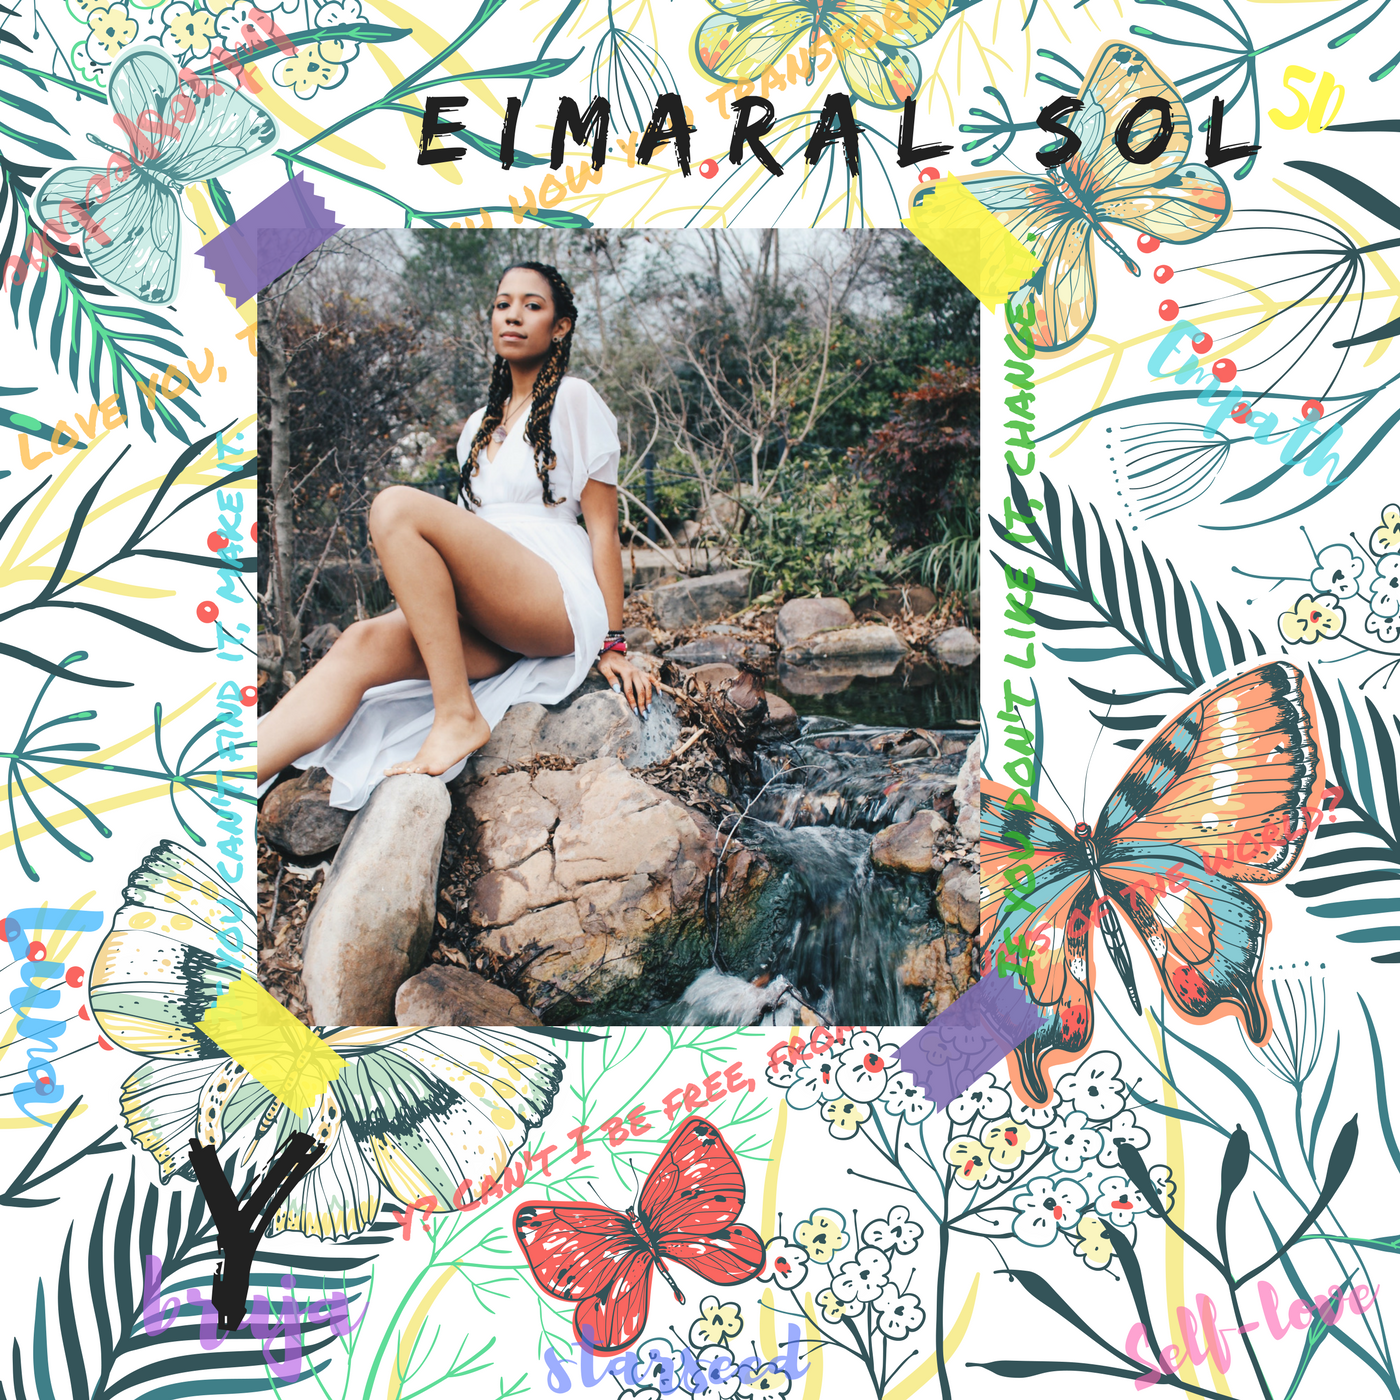 Eimaral Sol – “Y” (produced by Guess)